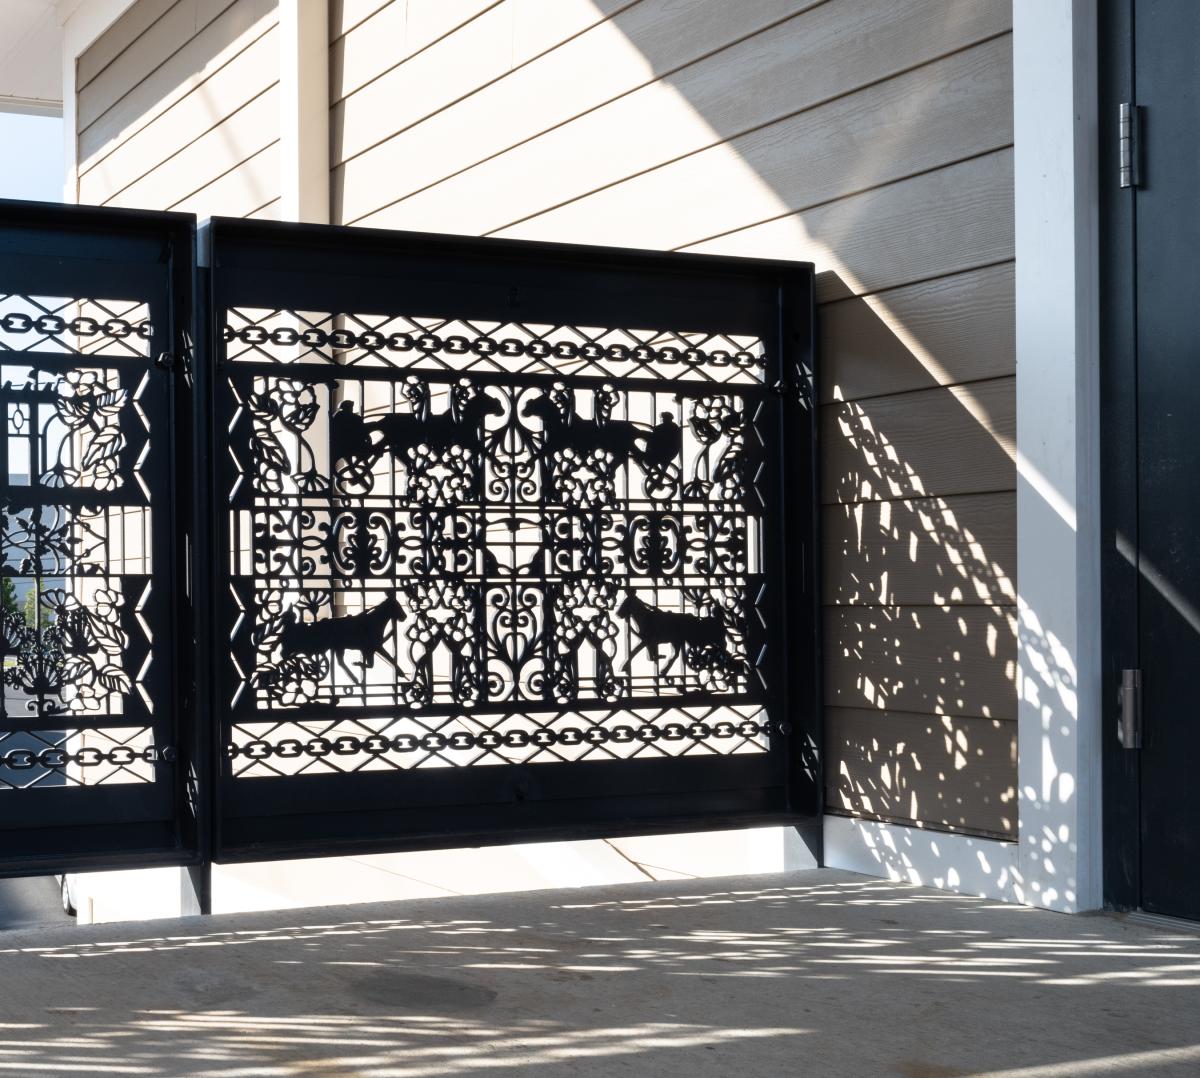 Decorative fence design featuring chains and horses. 